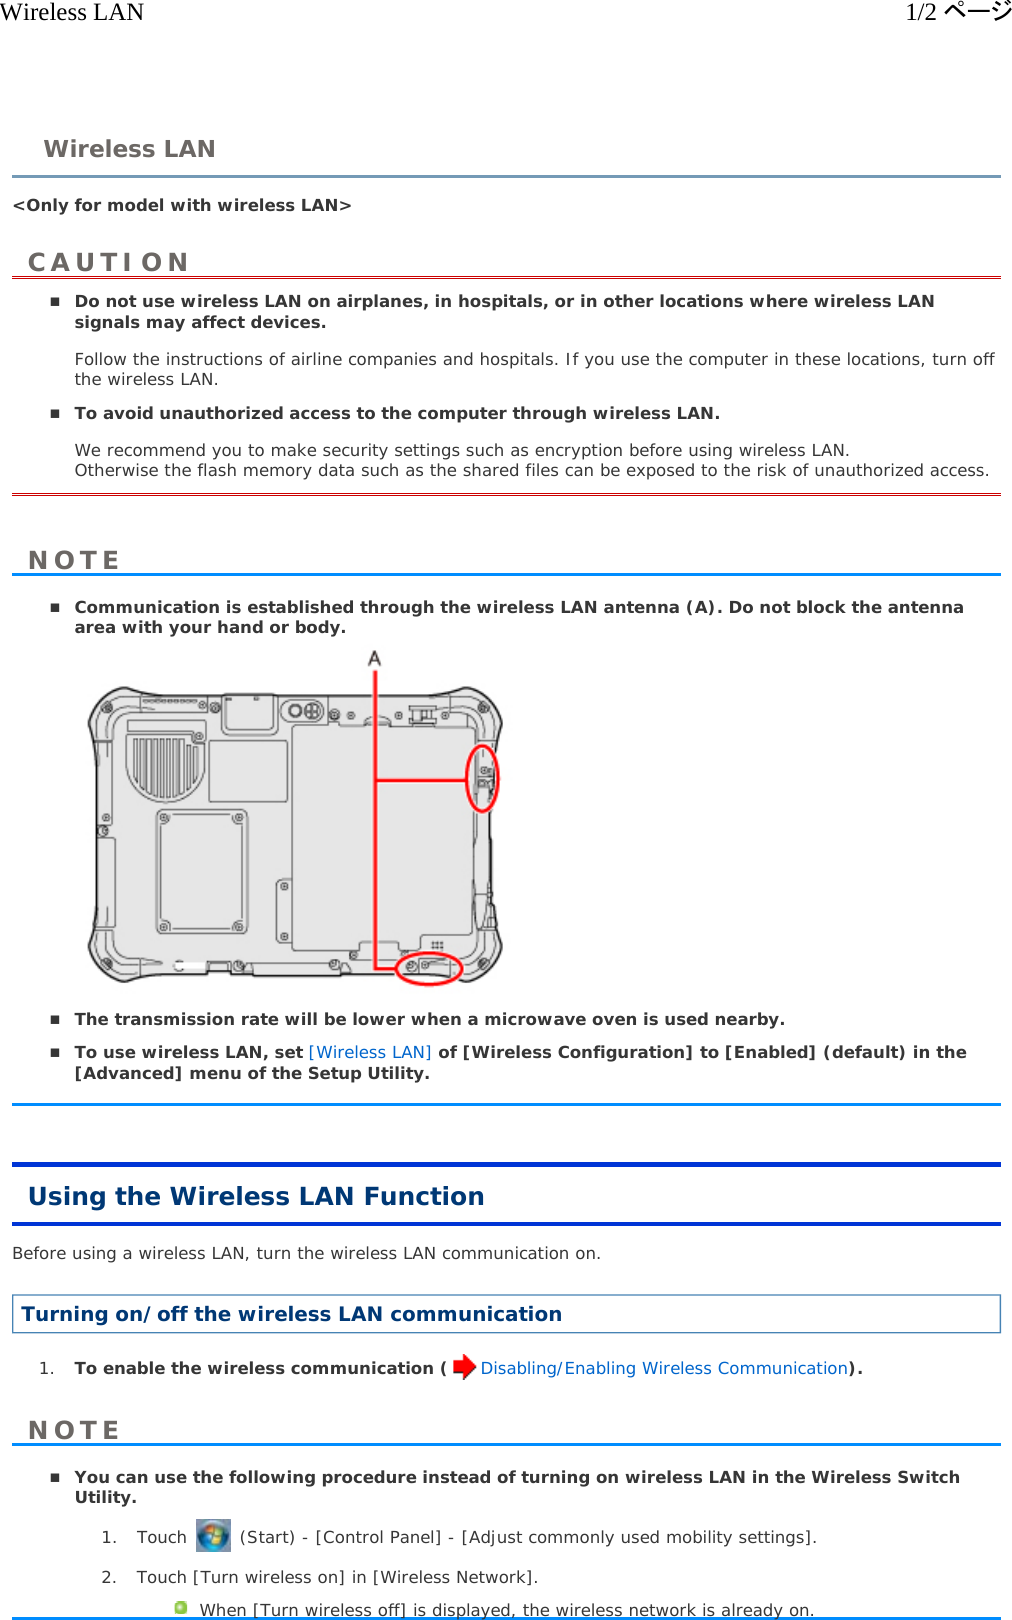 &lt;Only for model with wireless LAN&gt;  Do not use wireless LAN on airplanes, in hospitals, or in other locations where wireless LAN signals may affect devices. Follow the instructions of airline companies and hospitals. If you use the computer in these locations, turn off the wireless LAN. To avoid unauthorized access to the computer through wireless LAN. We recommend you to make security settings such as encryption before using wireless LAN. Otherwise the flash memory data such as the shared files can be exposed to the risk of unauthorized access. Communication is established through the wireless LAN antenna (A). Do not block the antenna area with your hand or body.   The transmission rate will be lower when a microwave oven is used nearby.  To use wireless LAN, set [Wireless LAN] of [Wireless Configuration] to [Enabled] (default) in the [Advanced] menu of the Setup Utility.  Using the Wireless LAN Function Before using a wireless LAN, turn the wireless LAN communication on.  Turning on/off the wireless LAN communication 1. To enable the wireless communication ( Disabling/Enabling Wireless Communication).  You can use the following procedure instead of turning on wireless LAN in the Wireless Switch Utility. 1. Touch   (Start) - [Control Panel] - [Adjust commonly used mobility settings].  2. Touch [Turn wireless on] in [Wireless Network]. When [Turn wireless off] is displayed, the wireless network is already on. Wireless LANCAUTIONNOTENOTE1/2ページWireless LAN